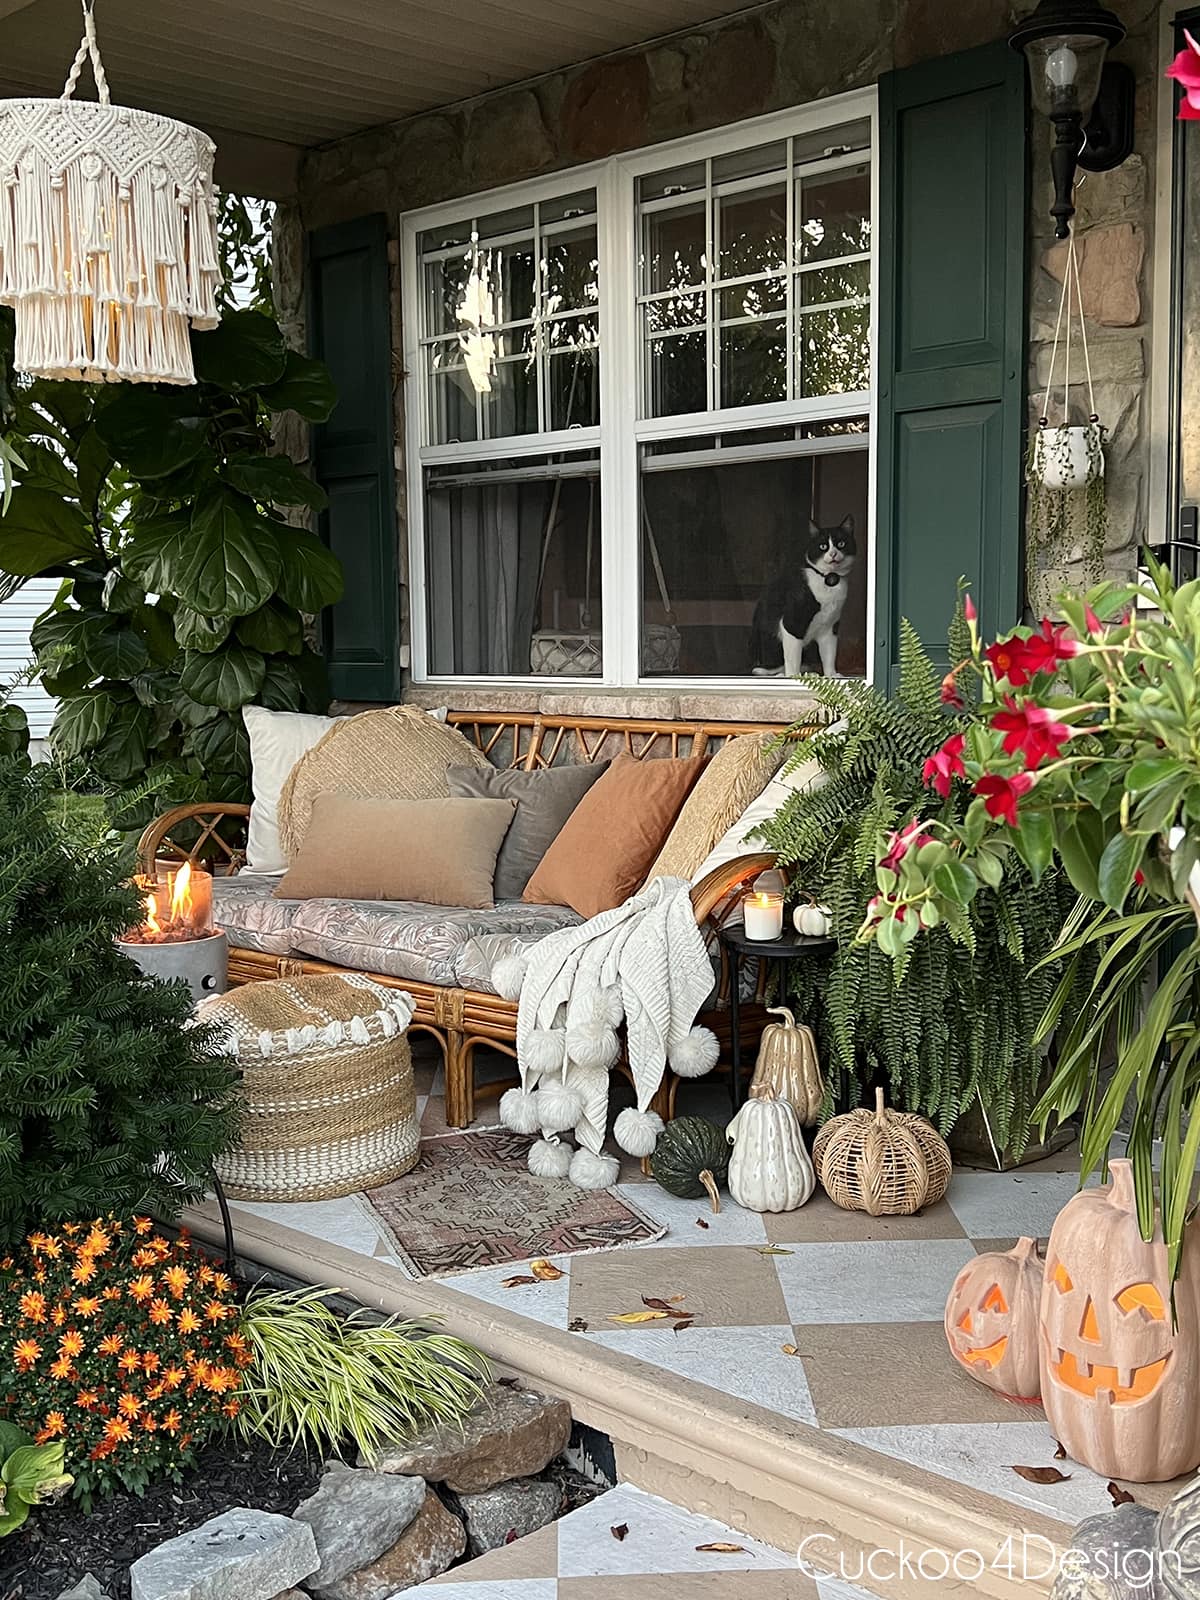 cozy fall porch with lots of indoor plants before bringing them inside